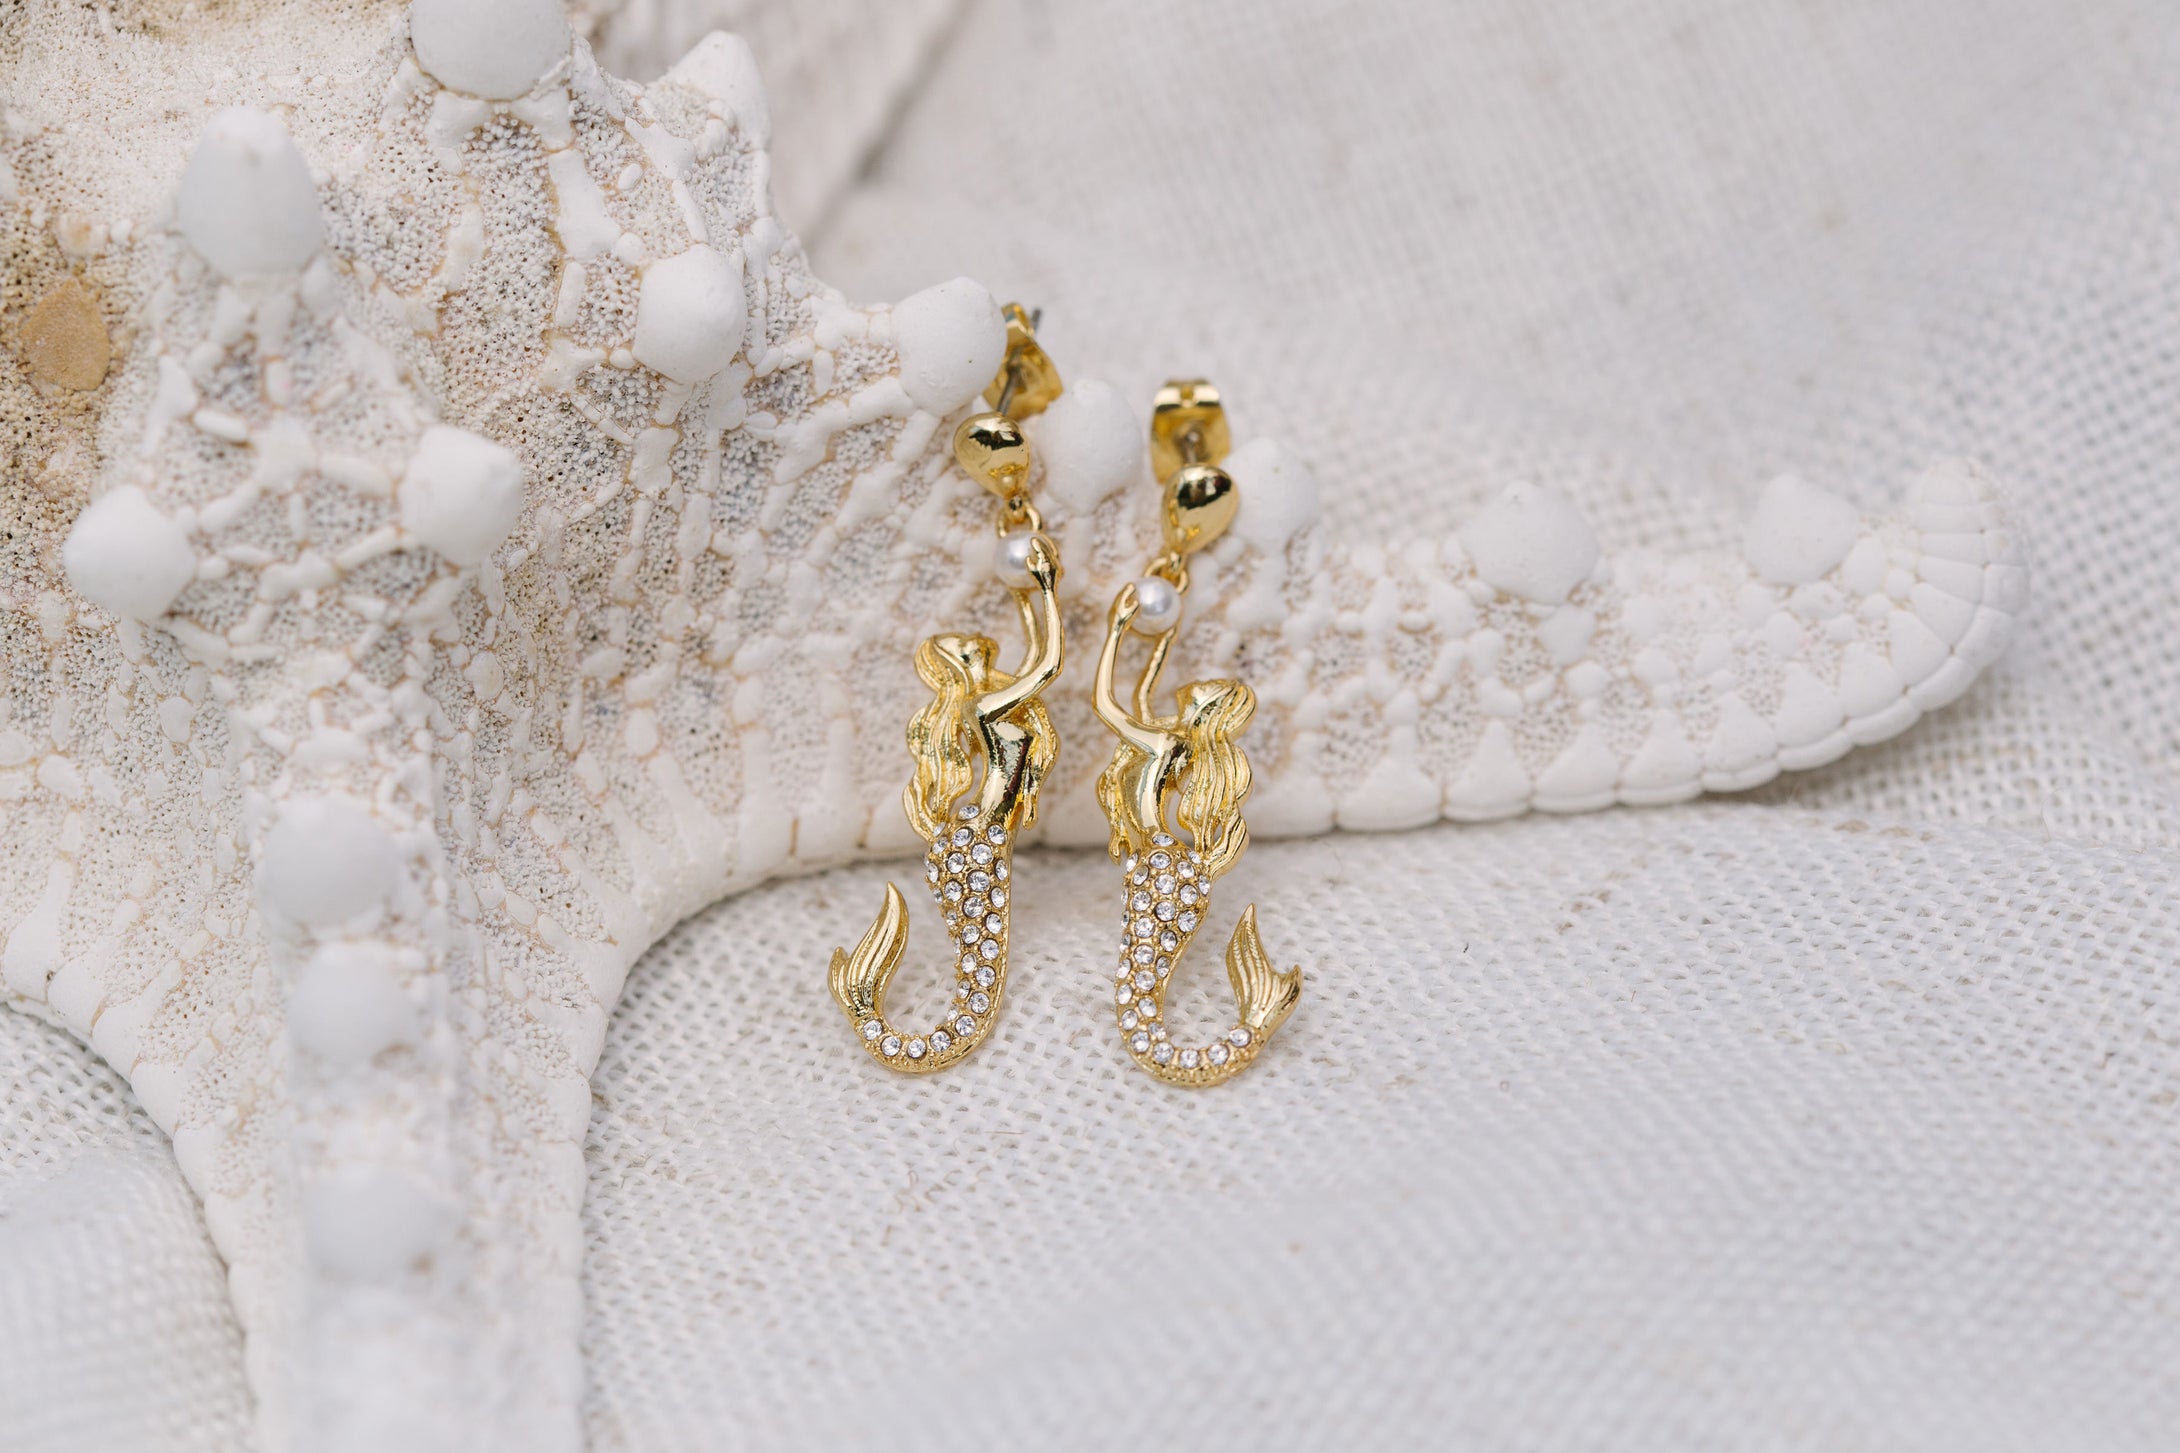 Gold Plated Mermaid Stud Earrings - With Clear Swarowski Crystals